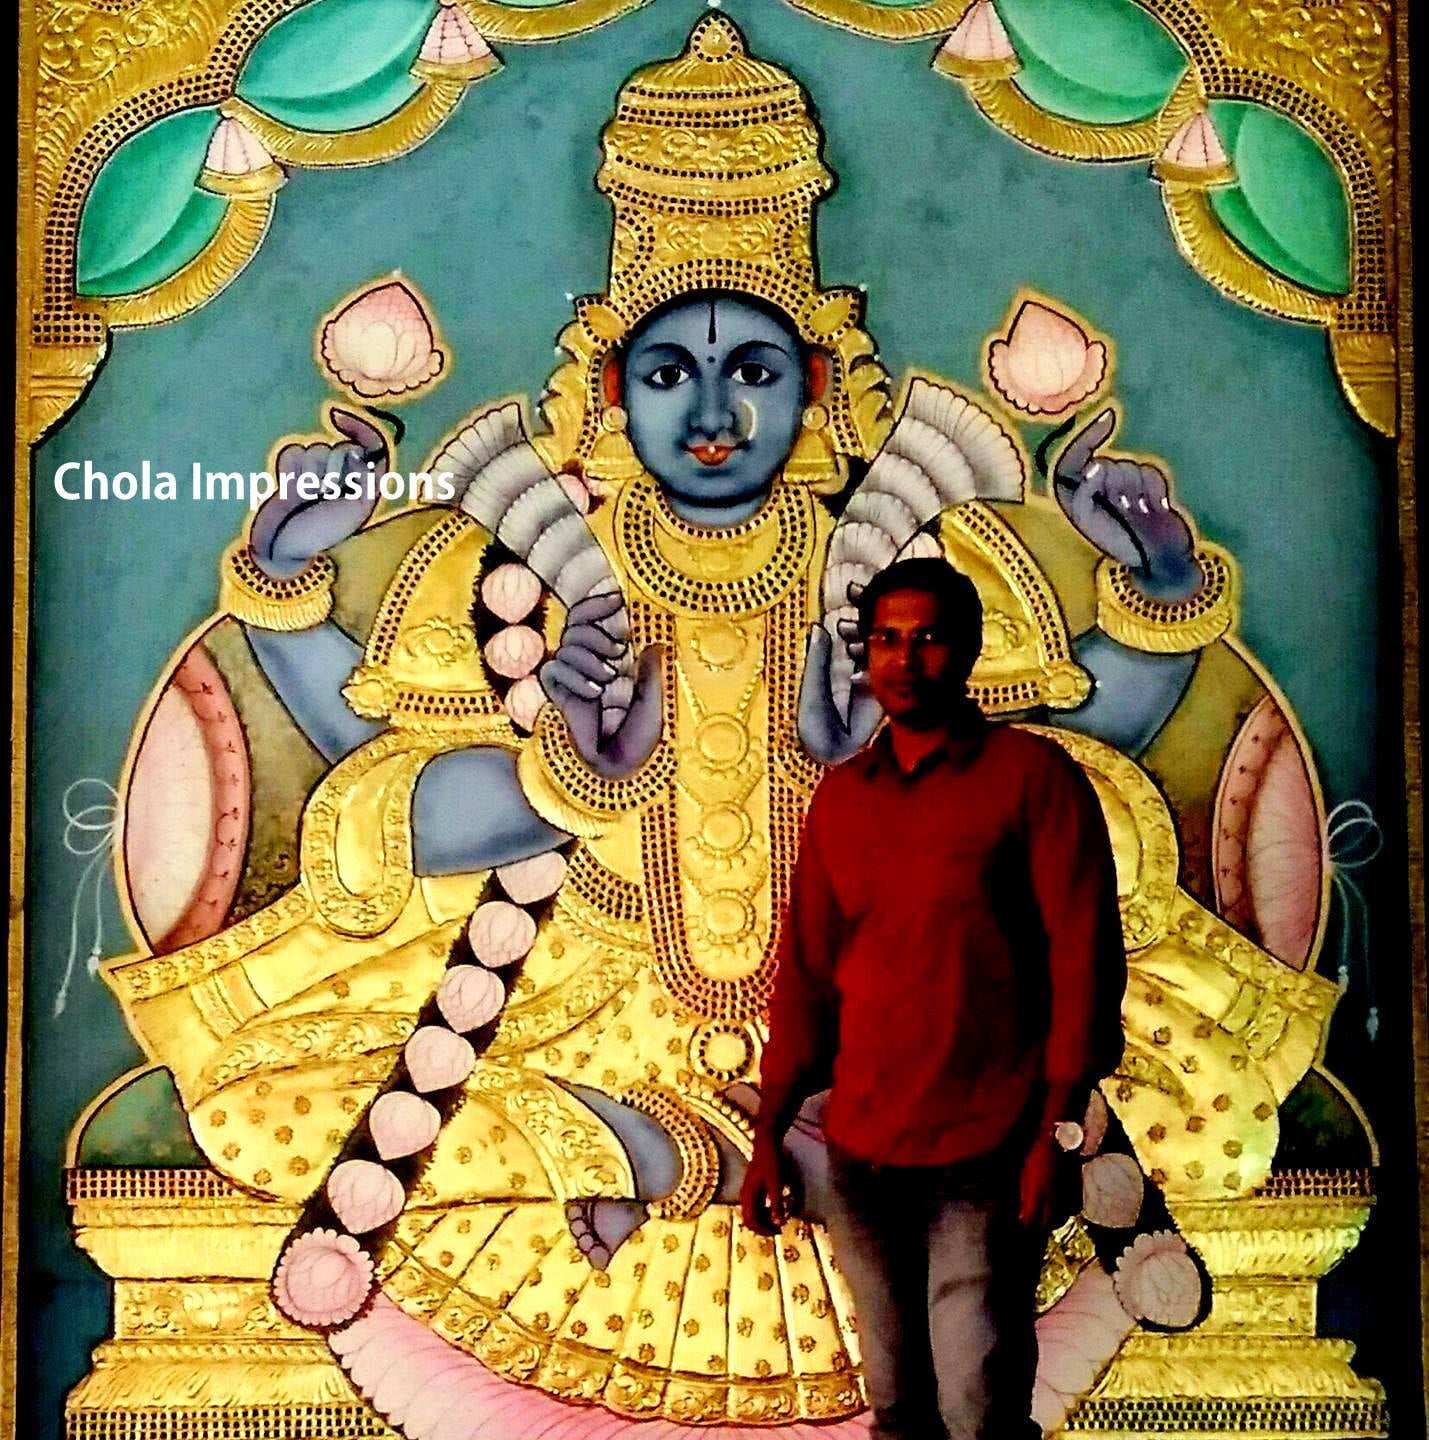 Eight Massive 11 ft Ashtalakshmi Tanjore Paintings made by us in record 18 days